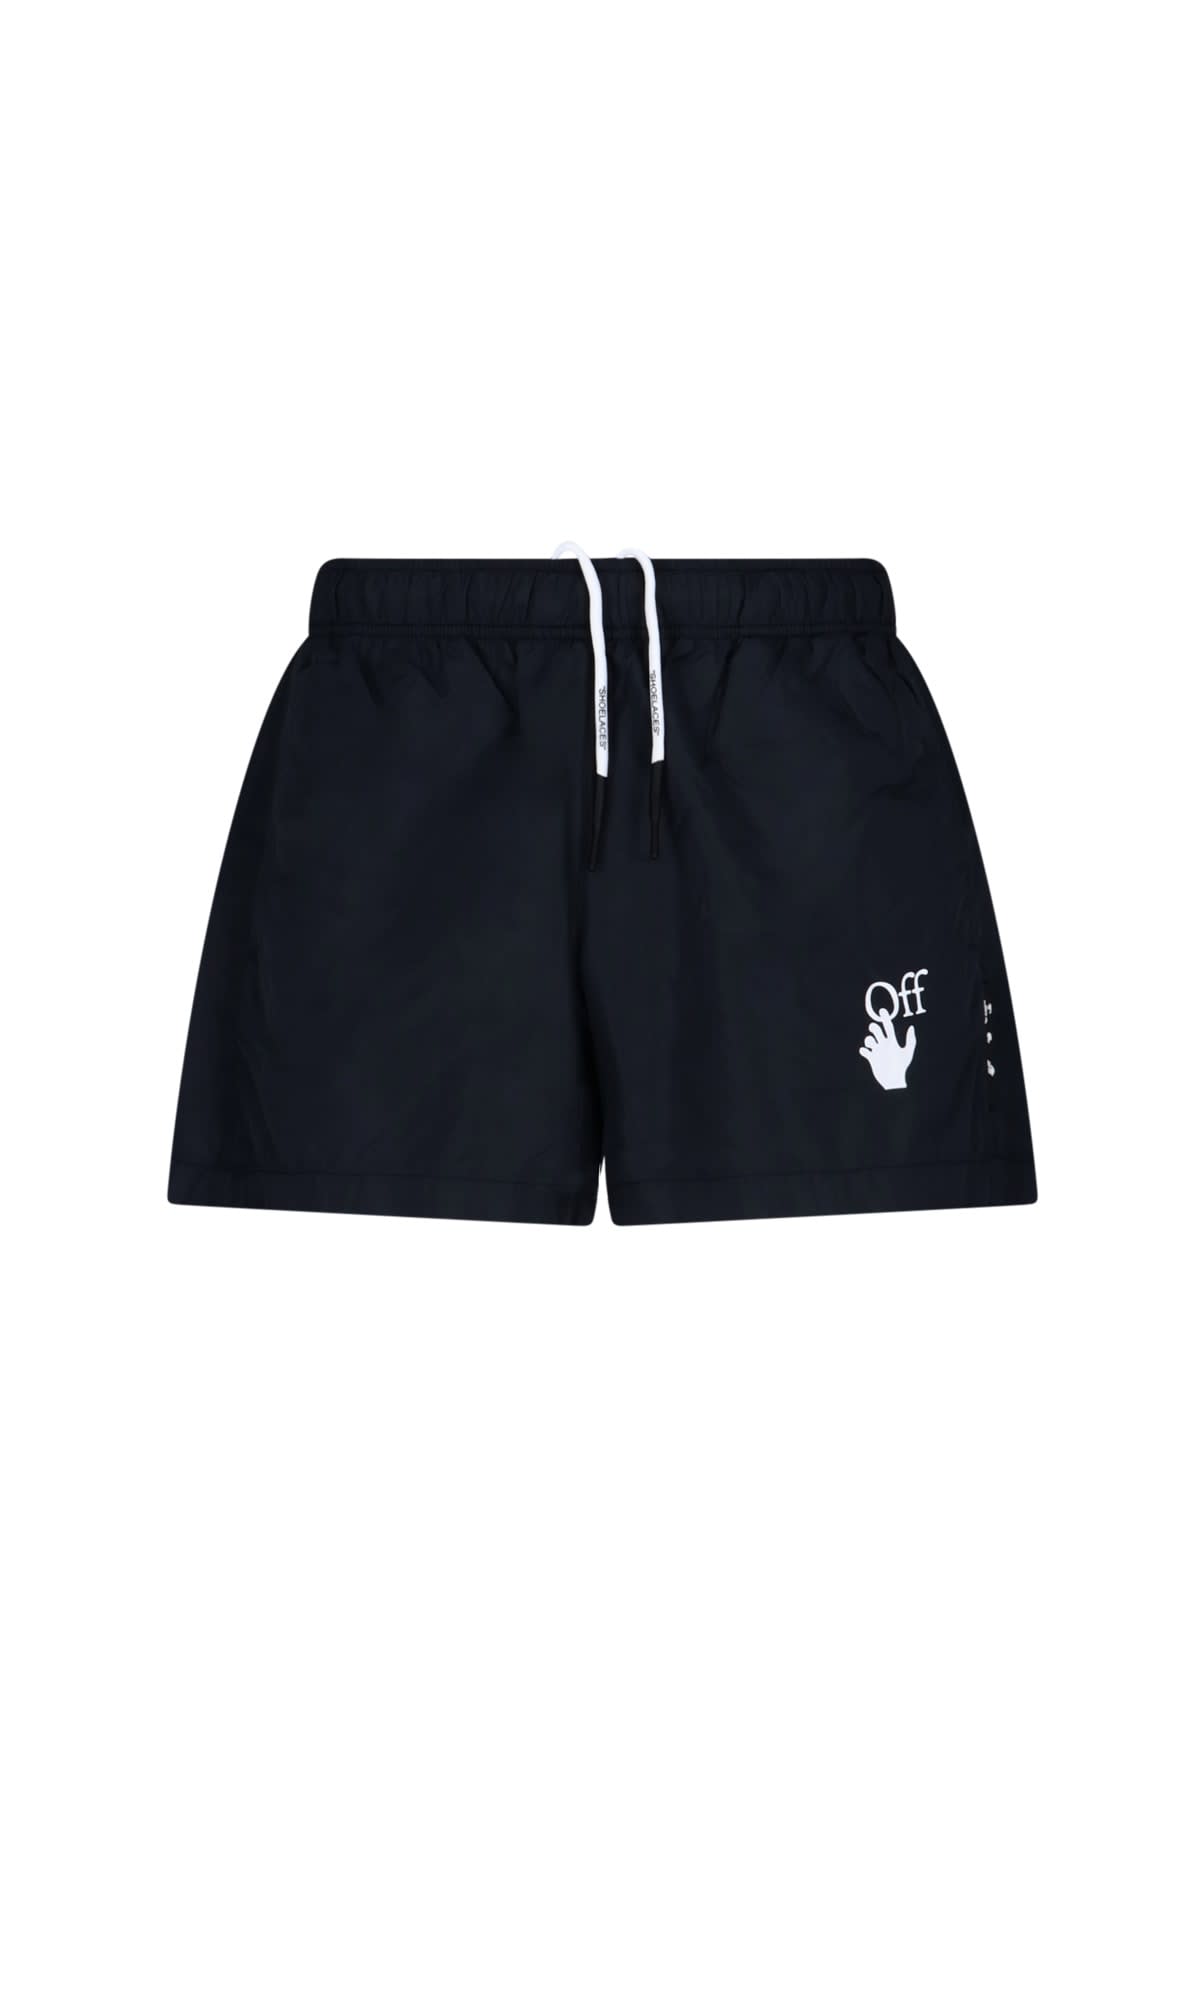 Off-White Hand Off Swimshorts